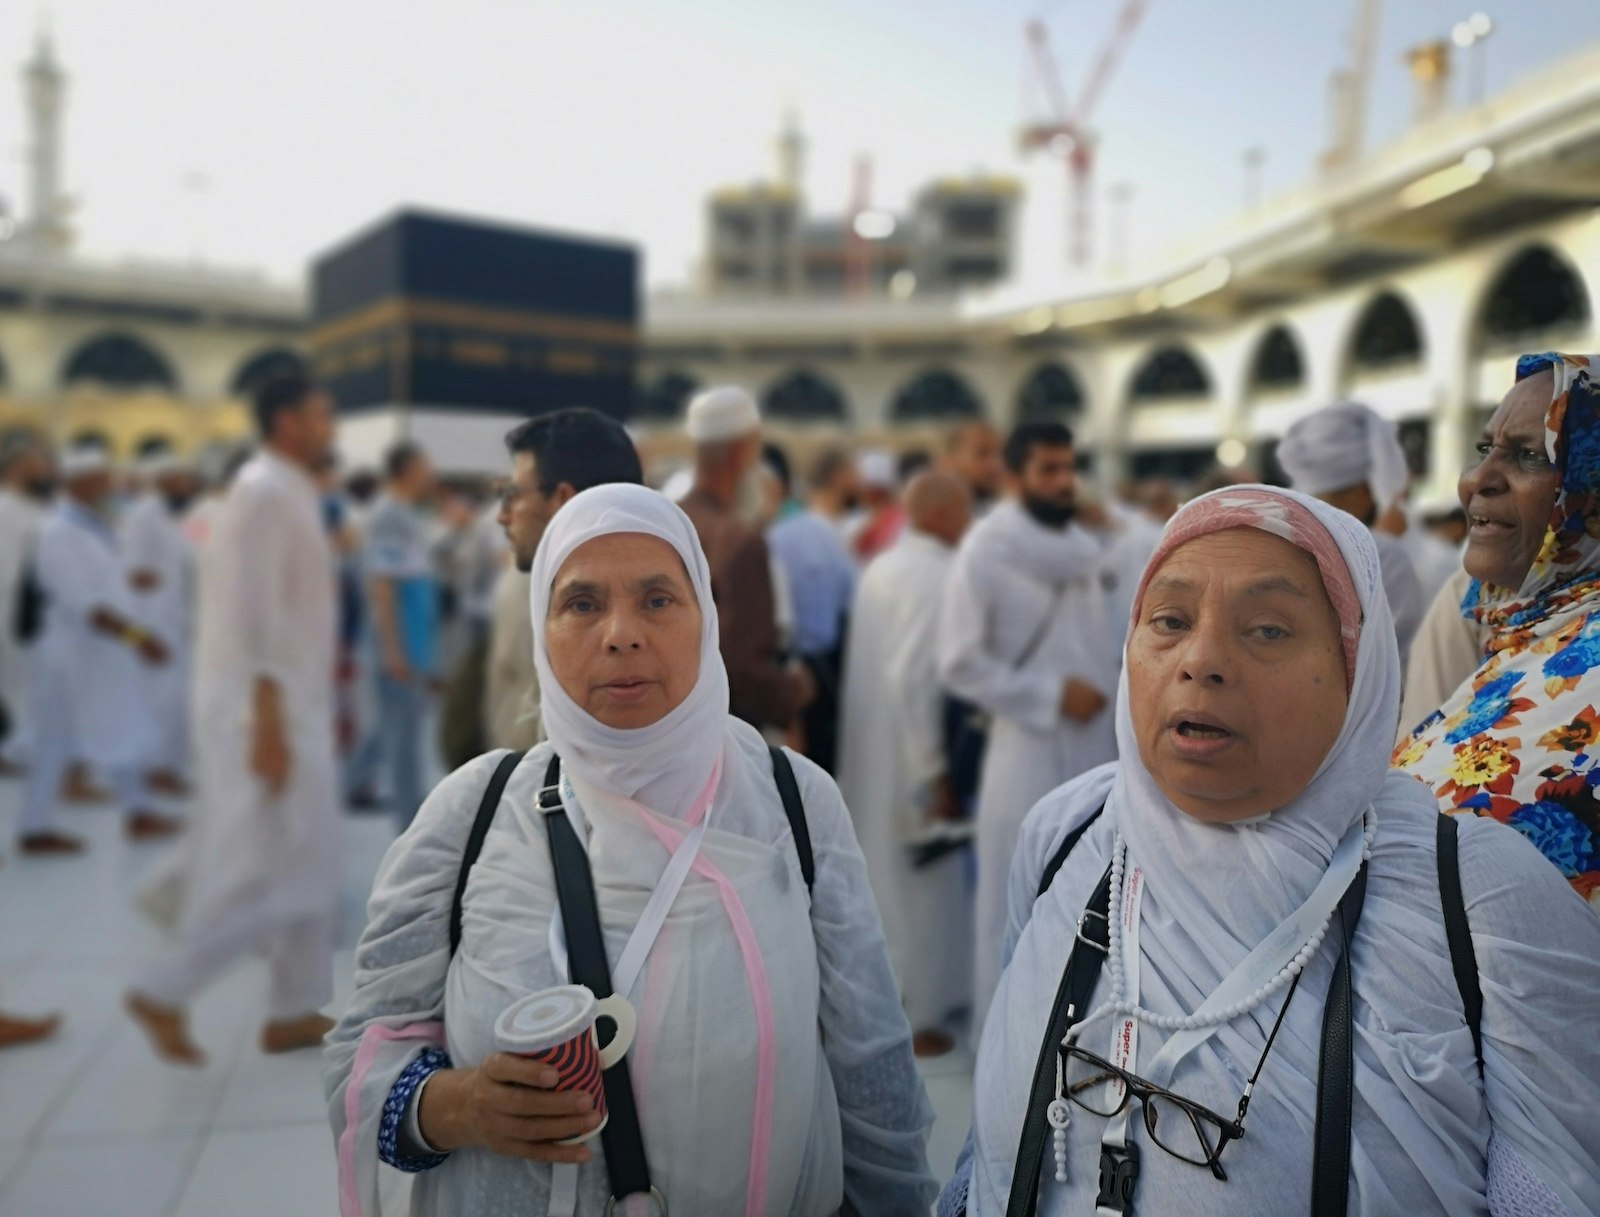 L-R: Tharik's mother and her twin sister standing before the Kaaba and surrounded by other pilgrims. Hajj diaries